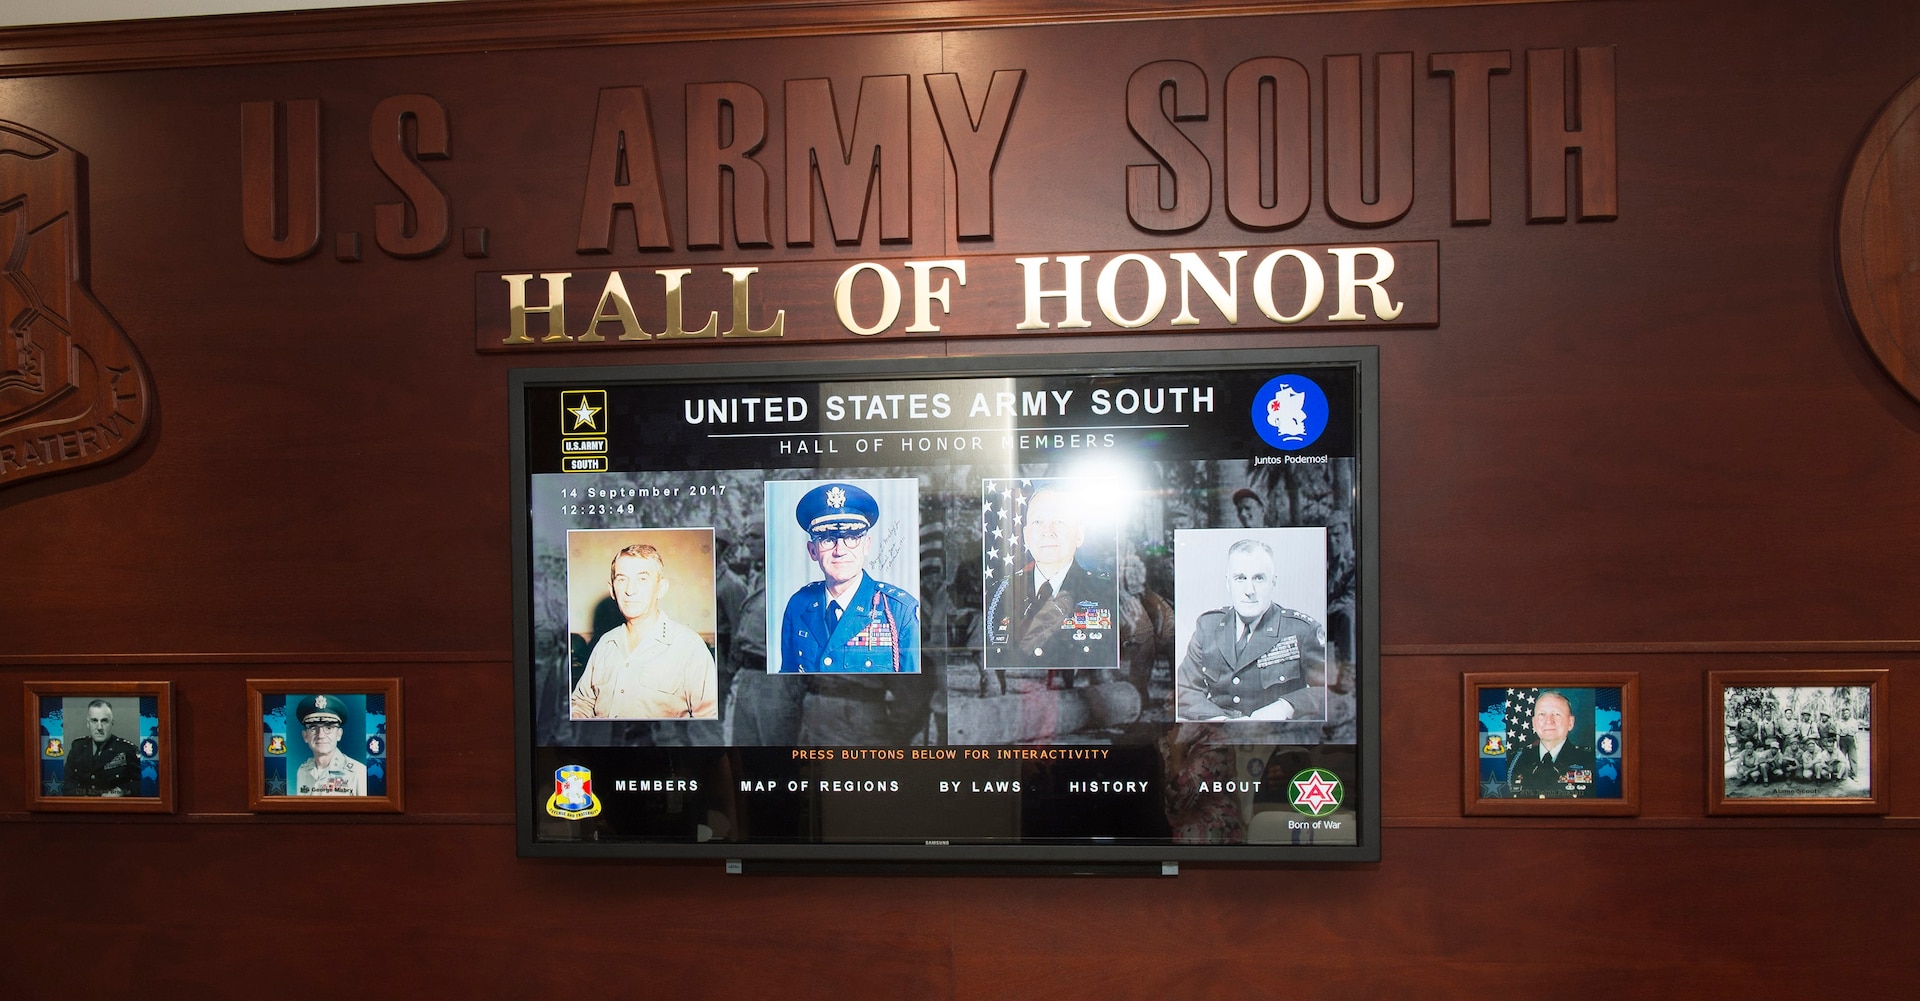 Army South unveiled their new, interactive Hall of Honor during a ceremony Sept. 14 in the headquarters building at Joint Base San Antonio-Fort Sam Houston. 14th in the HQ building.